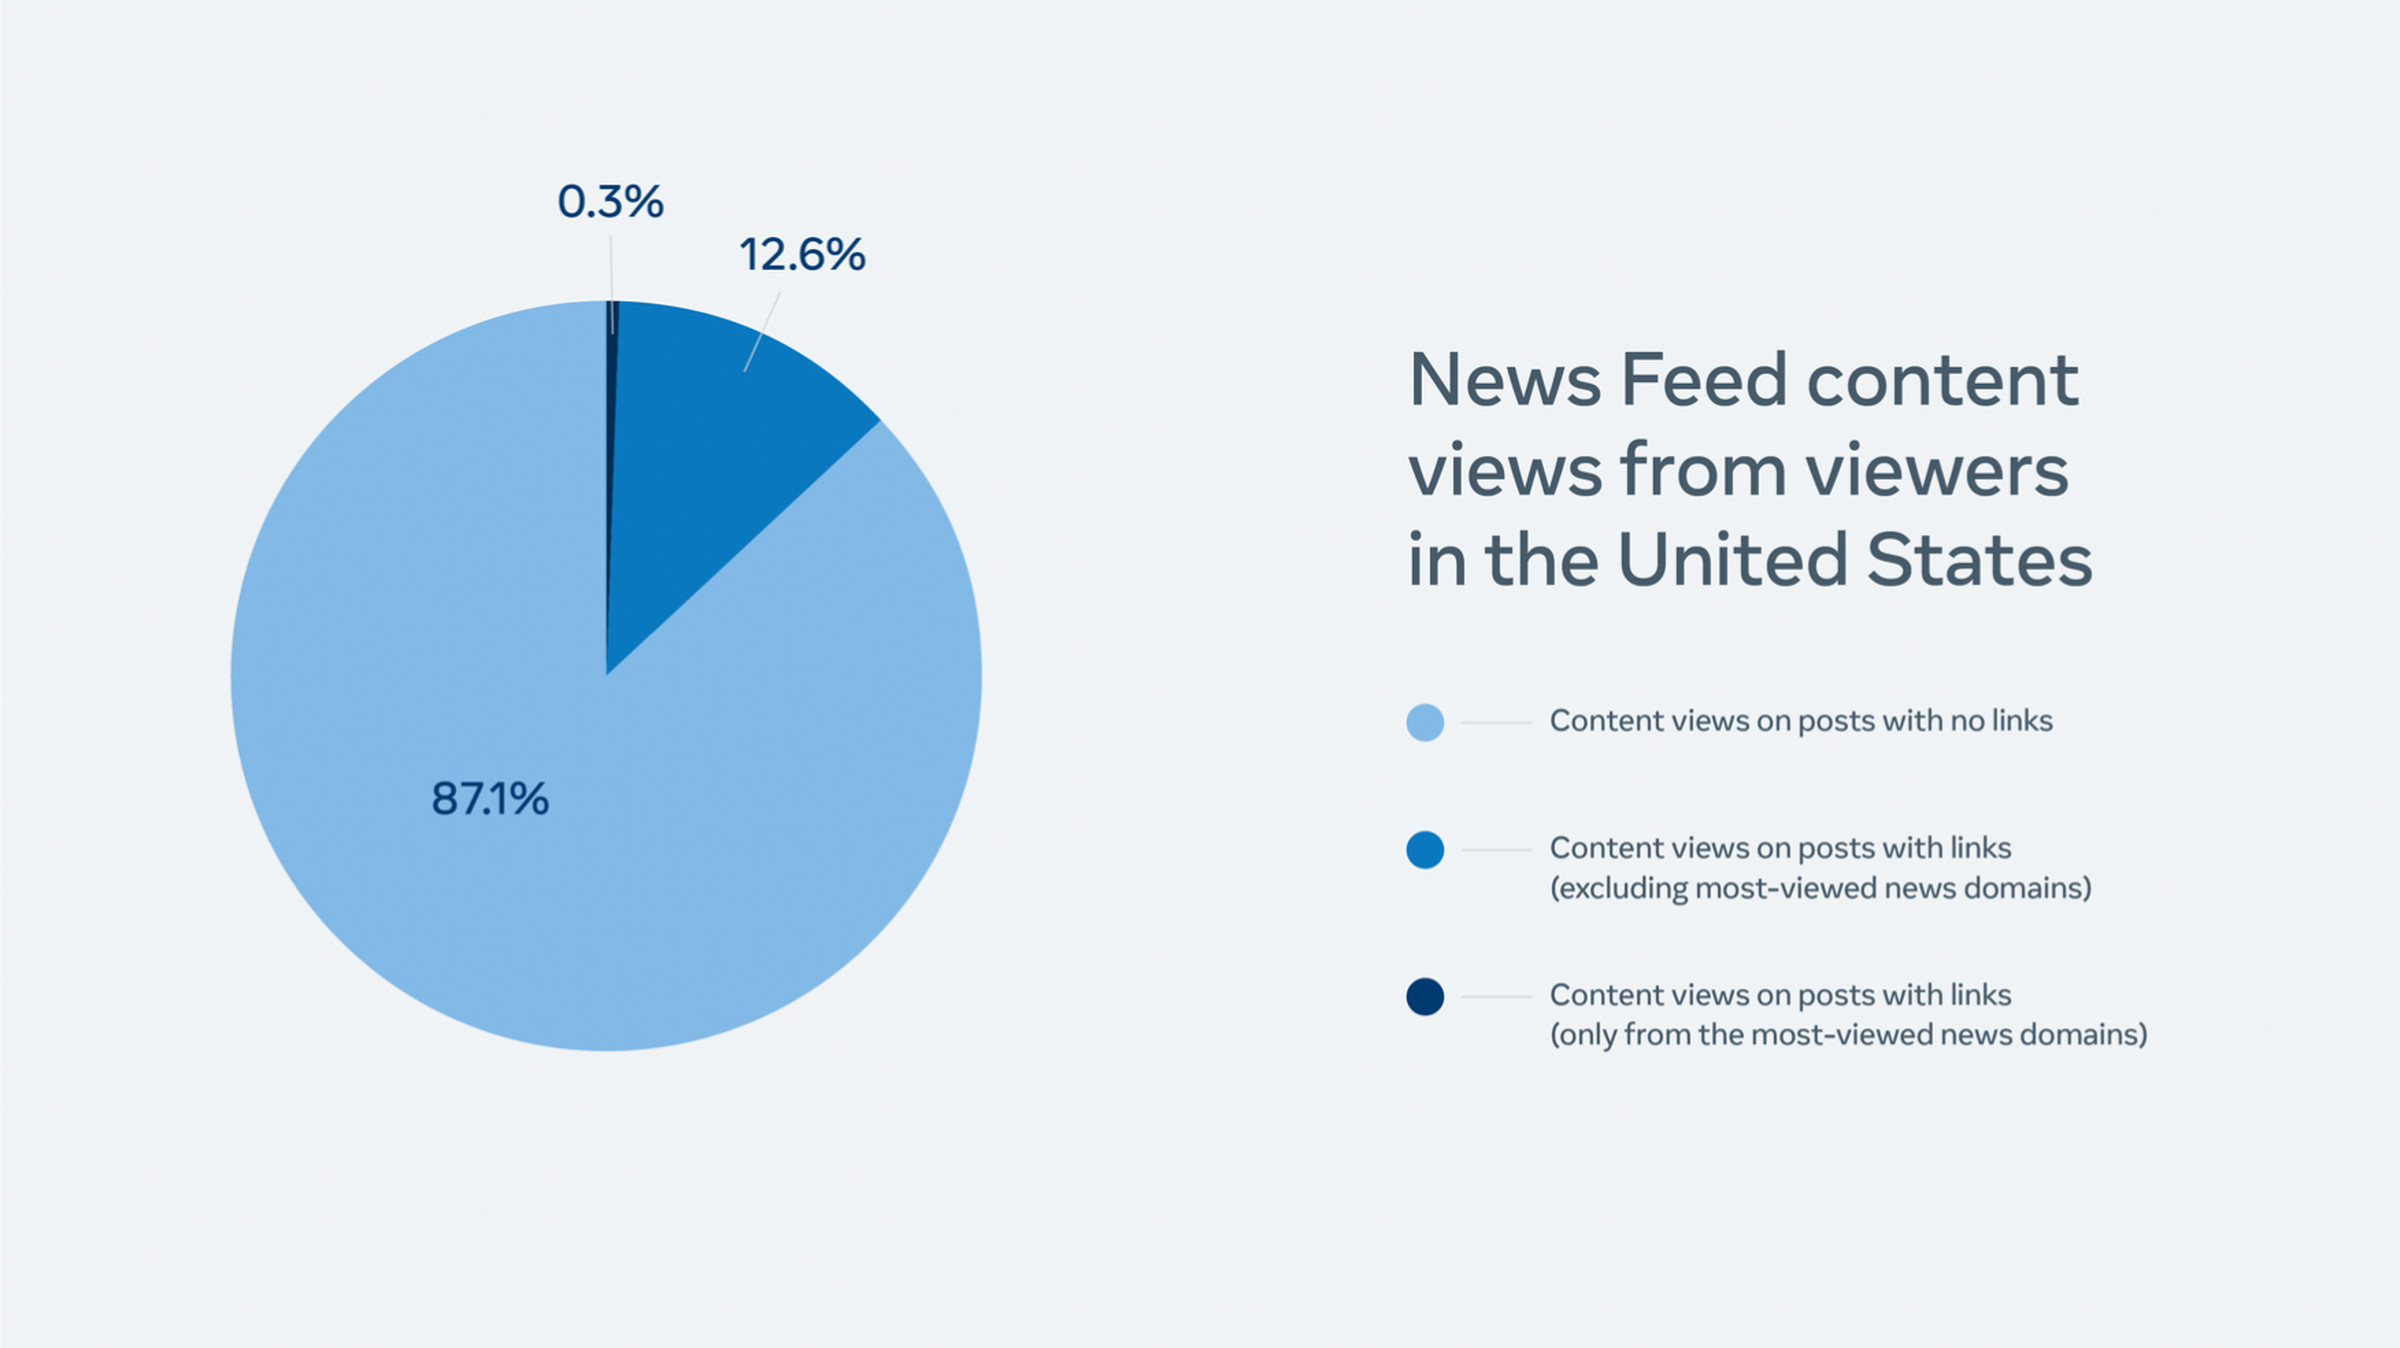 Content that links out to other sites doesn’t make up a large portion of the views.